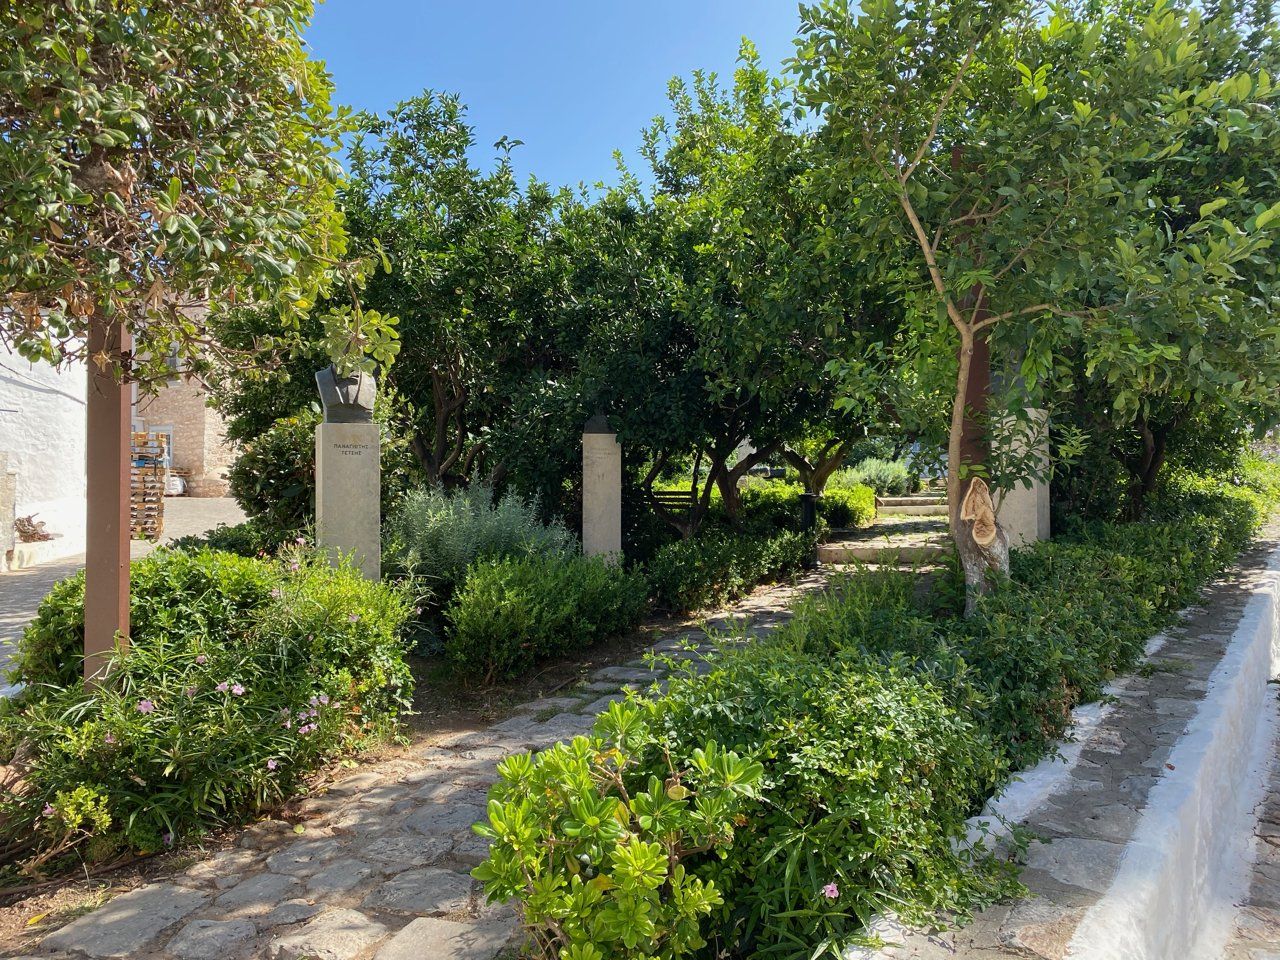 The Artist's Garden on Hydra where locals can freely pick Neranja Oranges and Lemons.